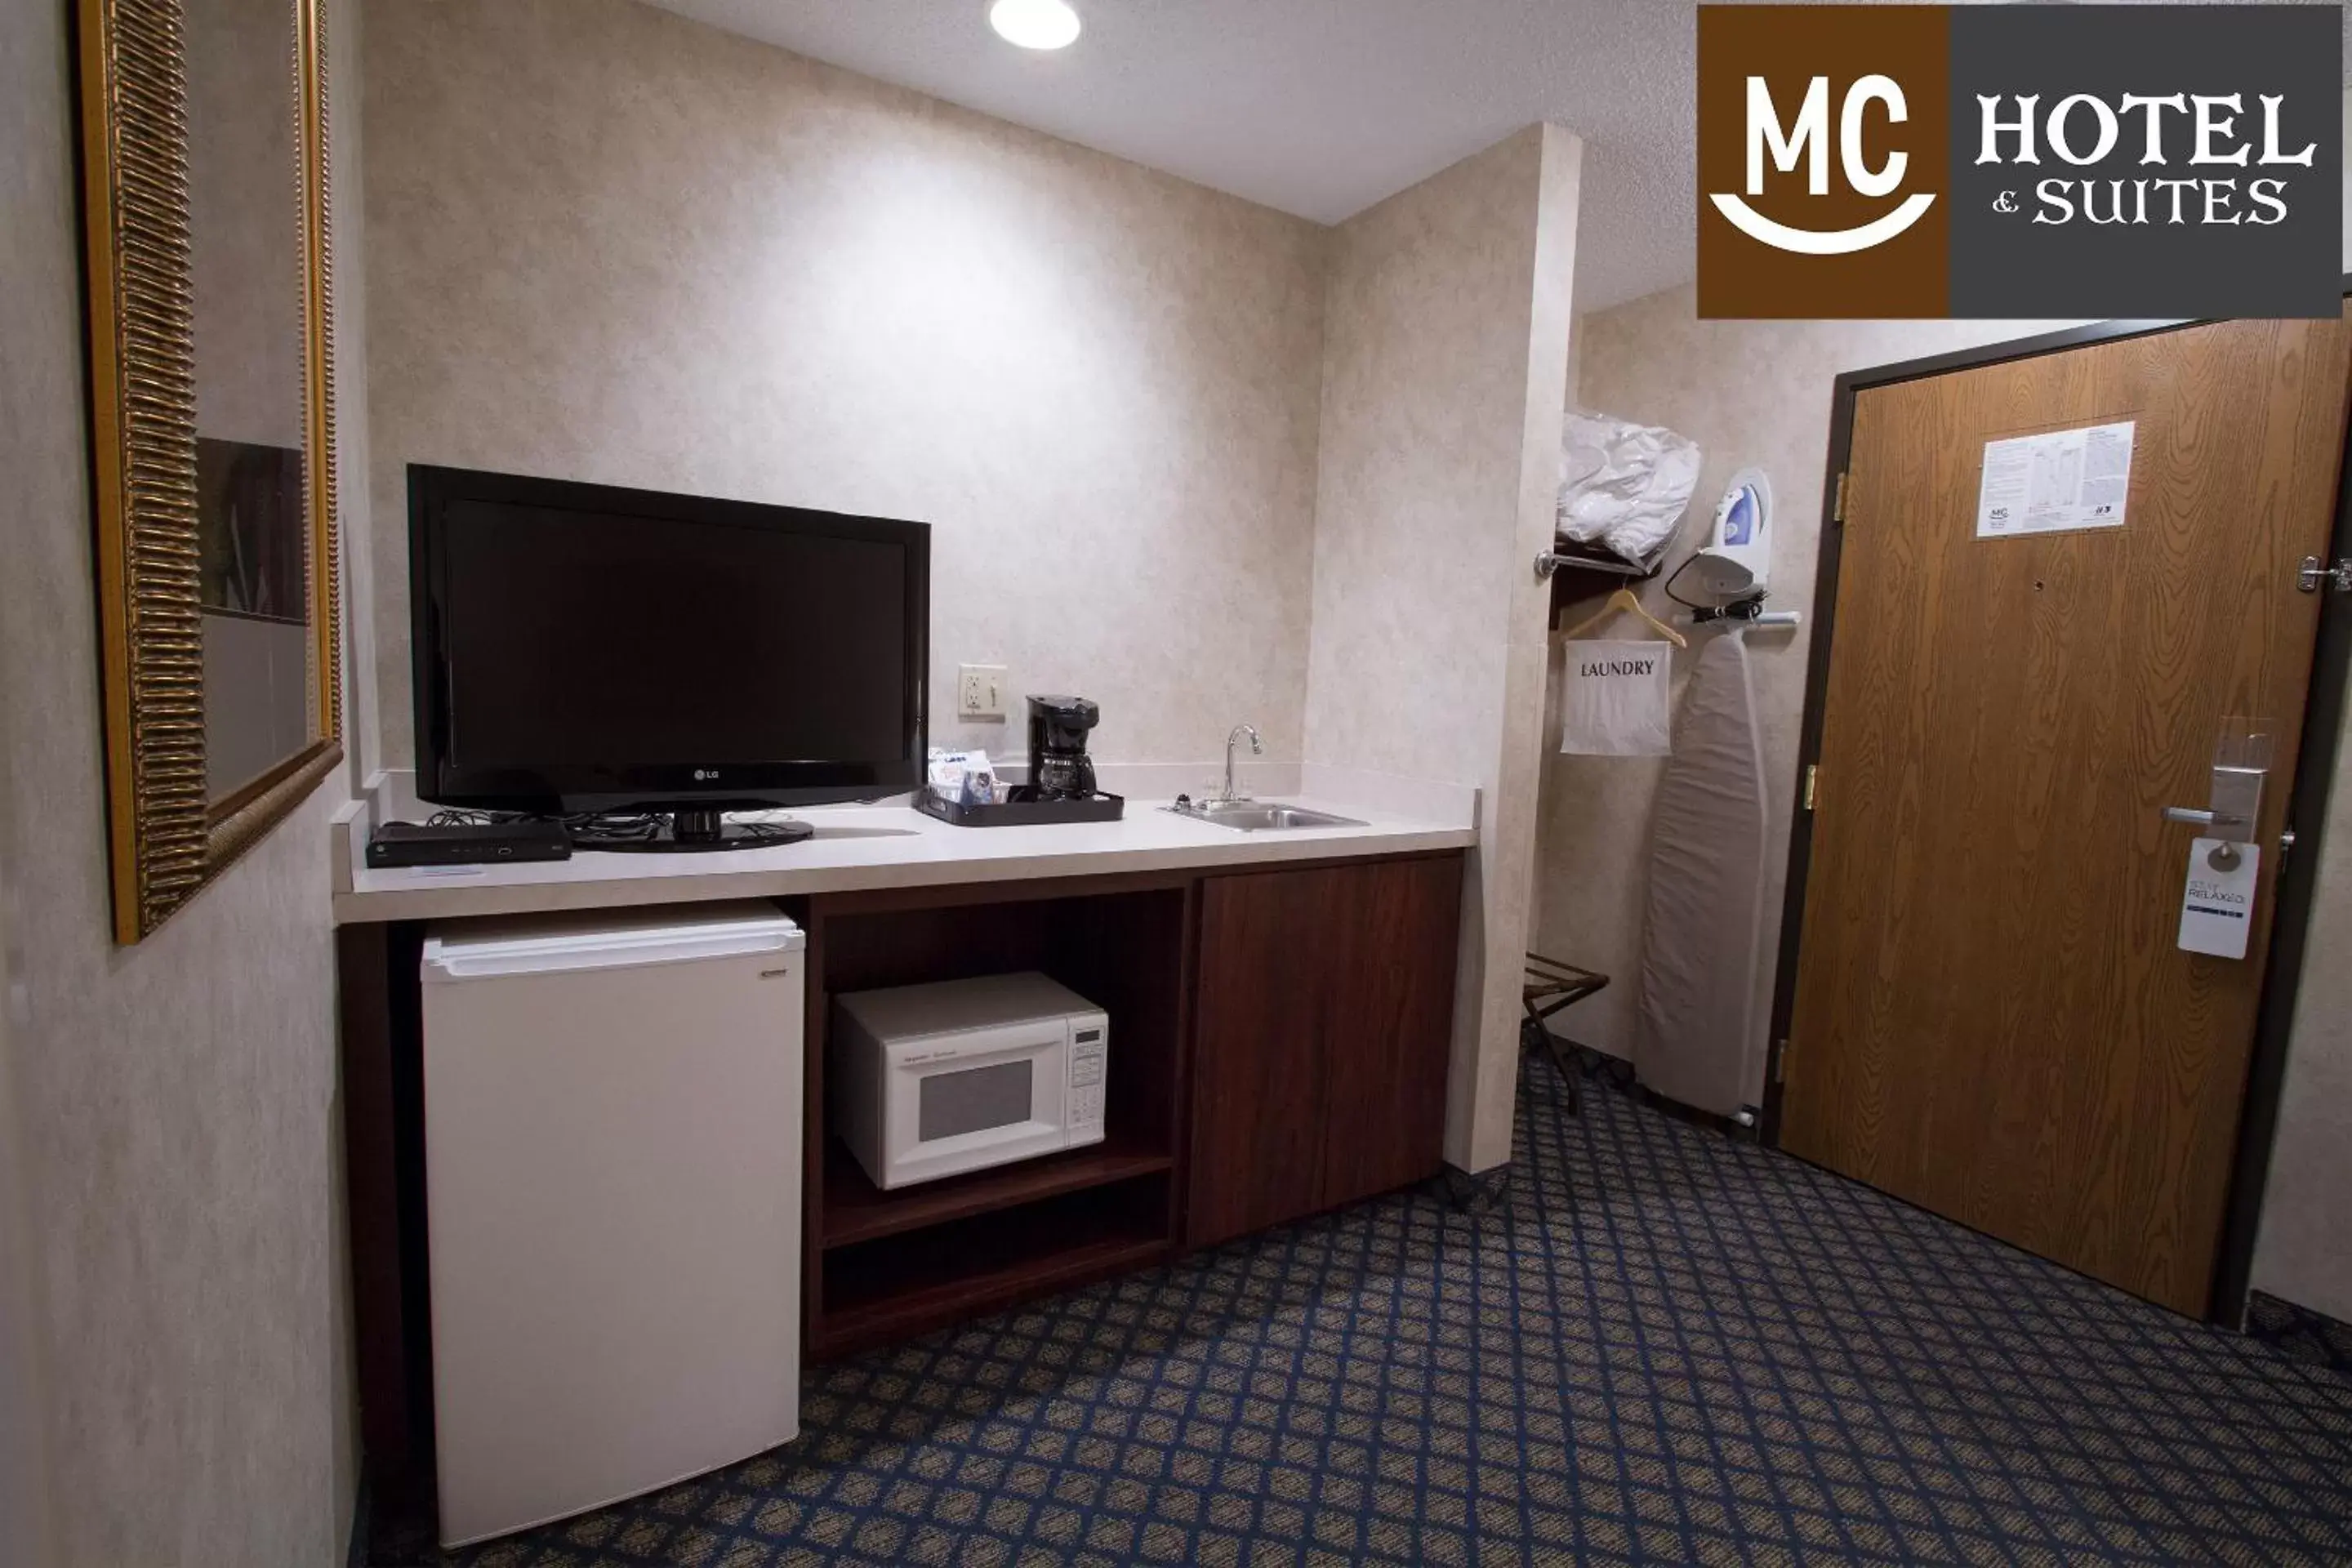 Other, TV/Entertainment Center in Miles City Hotel & Suites